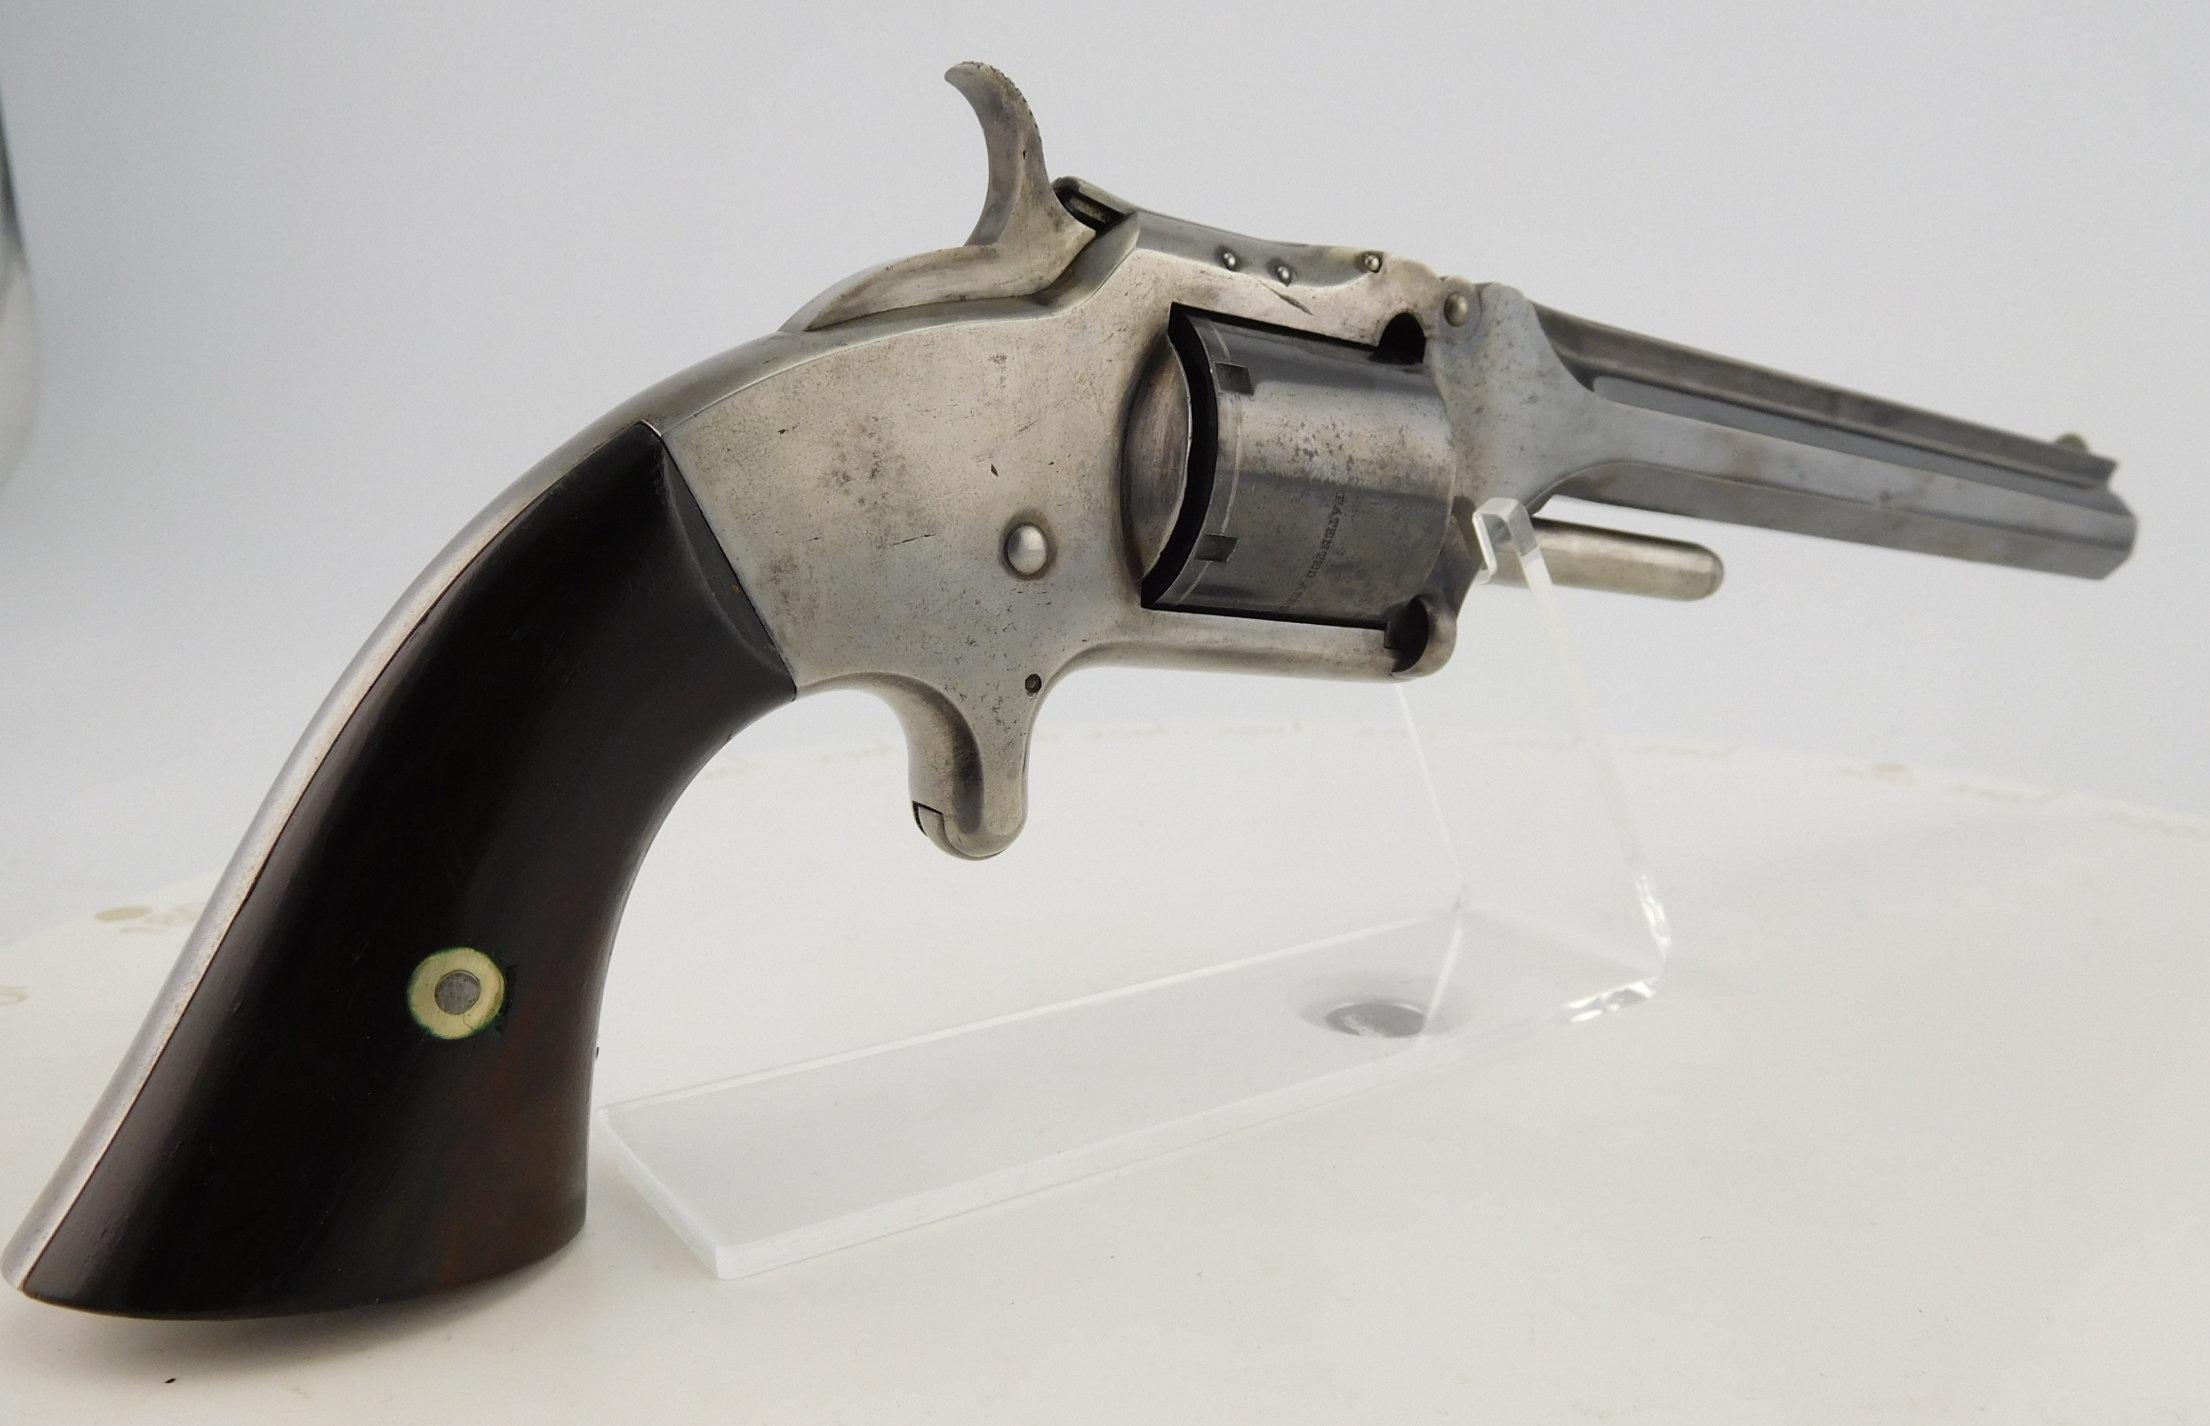 Lot #408-S & W Mdl 2, Army Tip-Up, 6 Shot Revolver